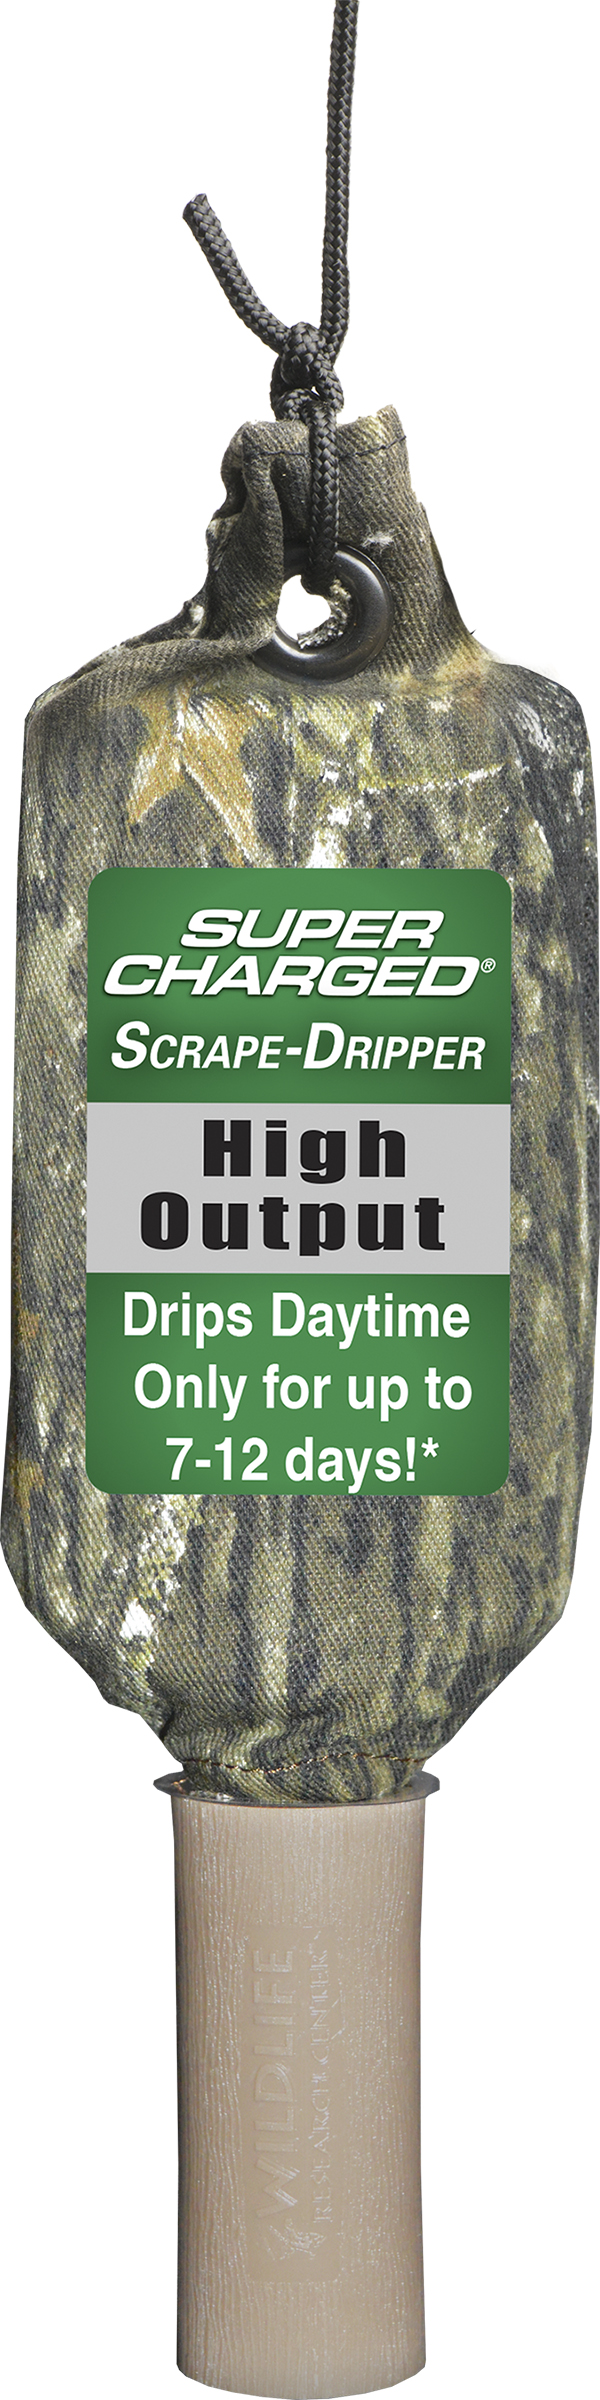 Wildlife Research Center’s New Super Charged Scrape-Dripper